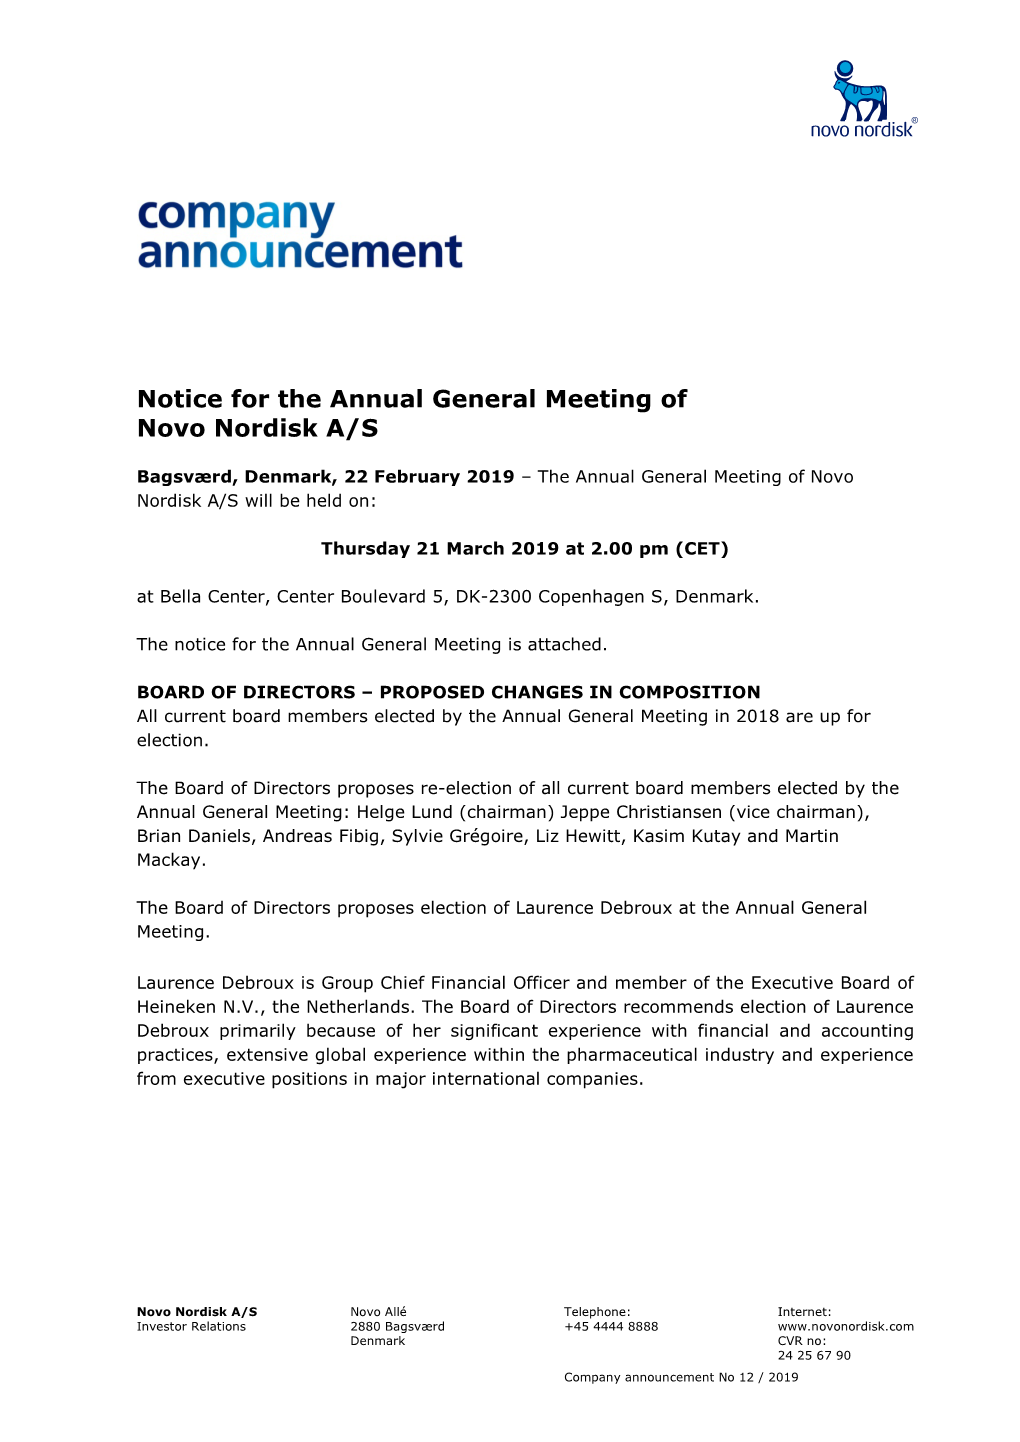 Notice for the Annual General Meeting of Novo Nordisk A/S